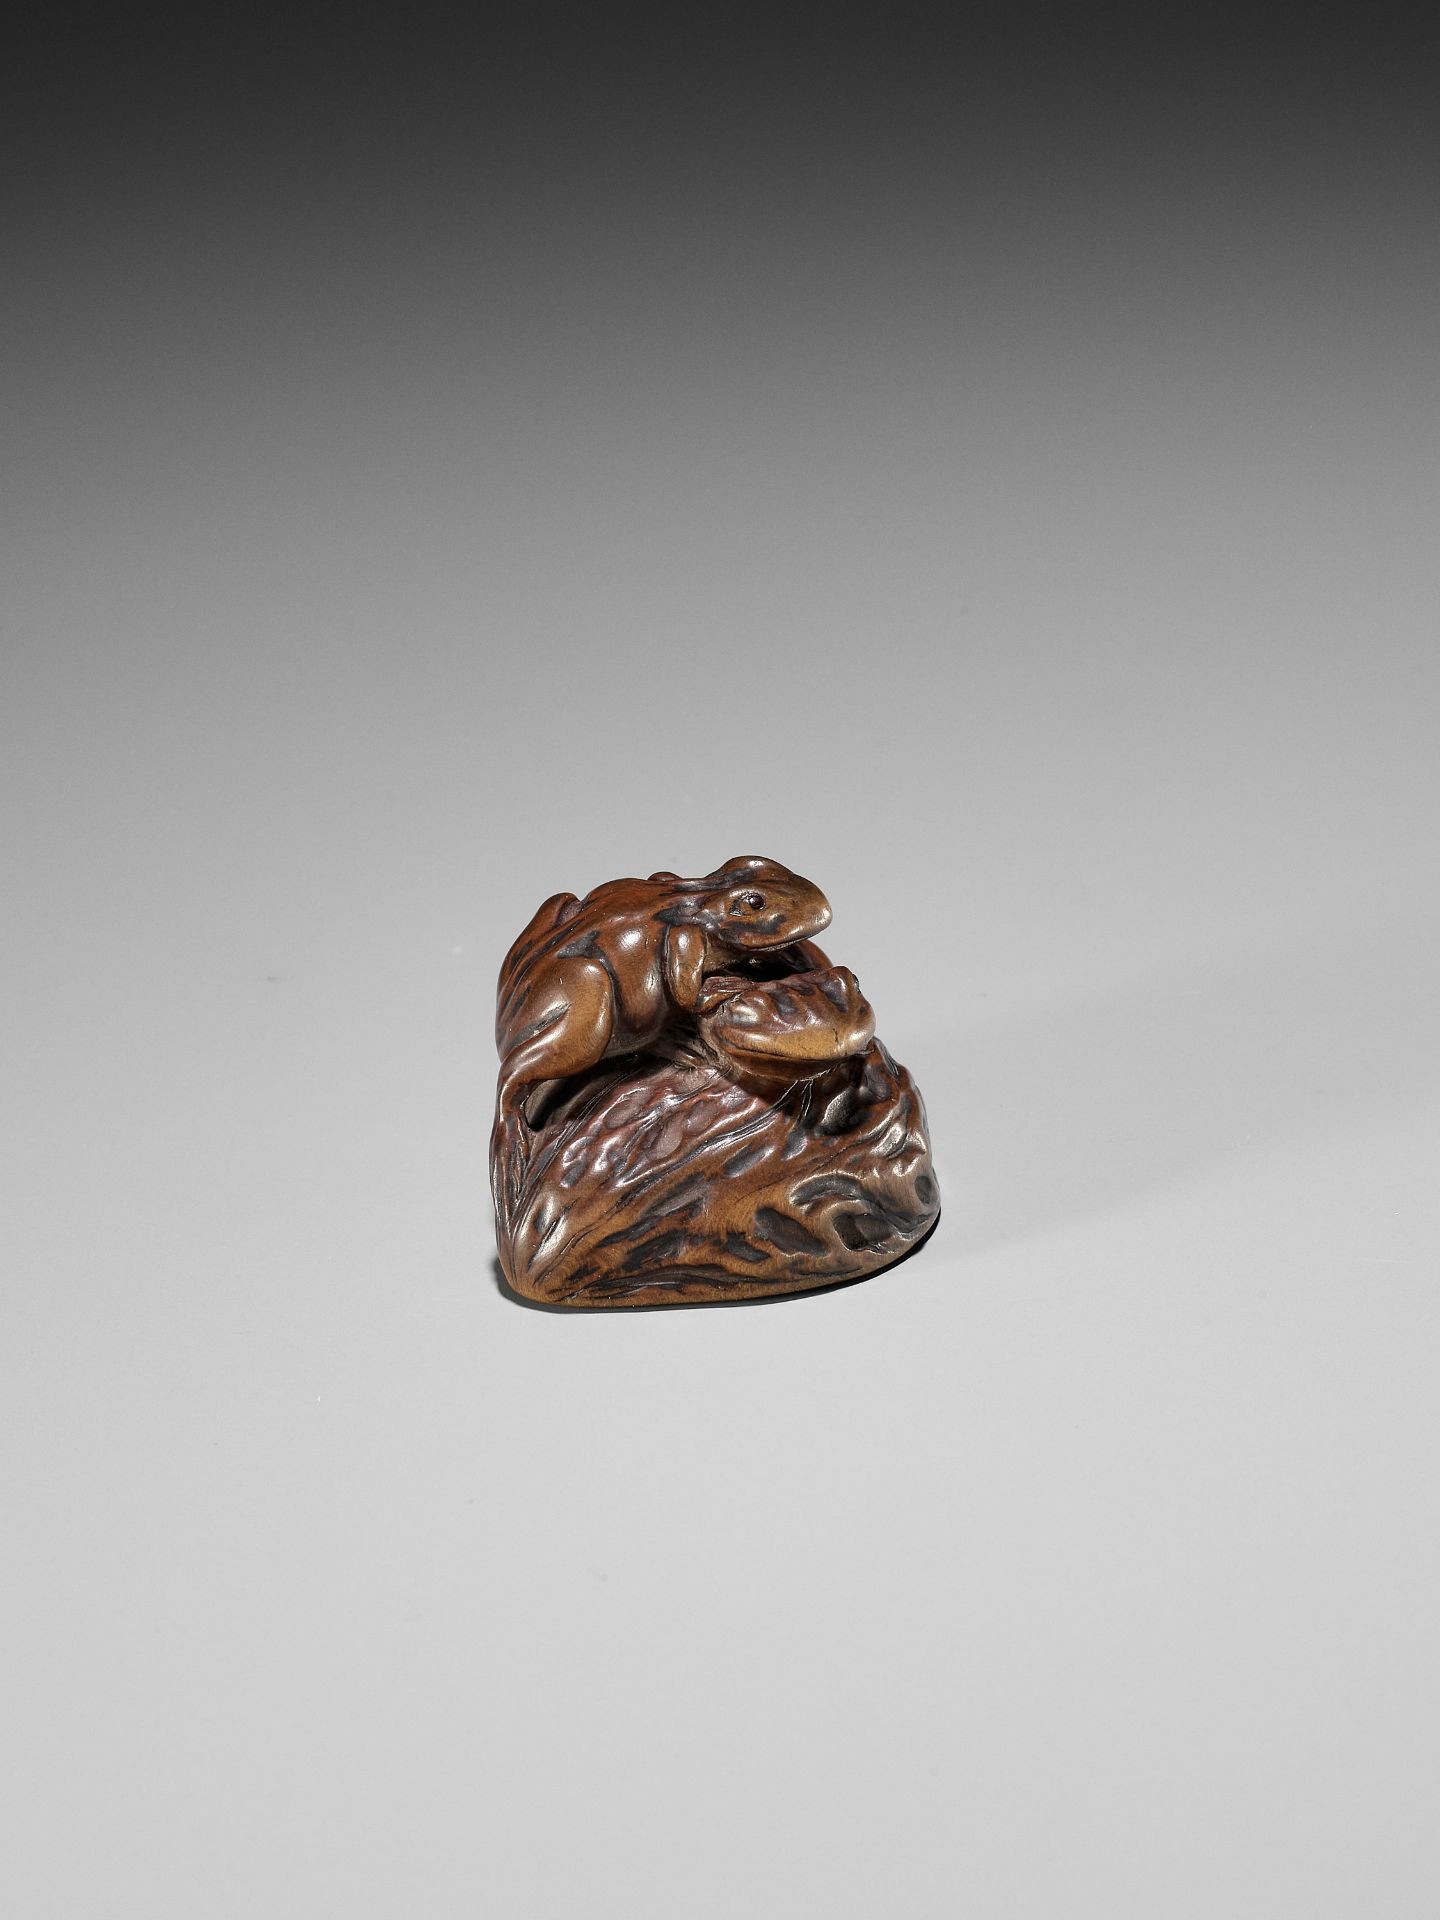 ISSAN: A WOOD NETSUKE OF TWO TOADS ON A WALNUT - Image 10 of 11